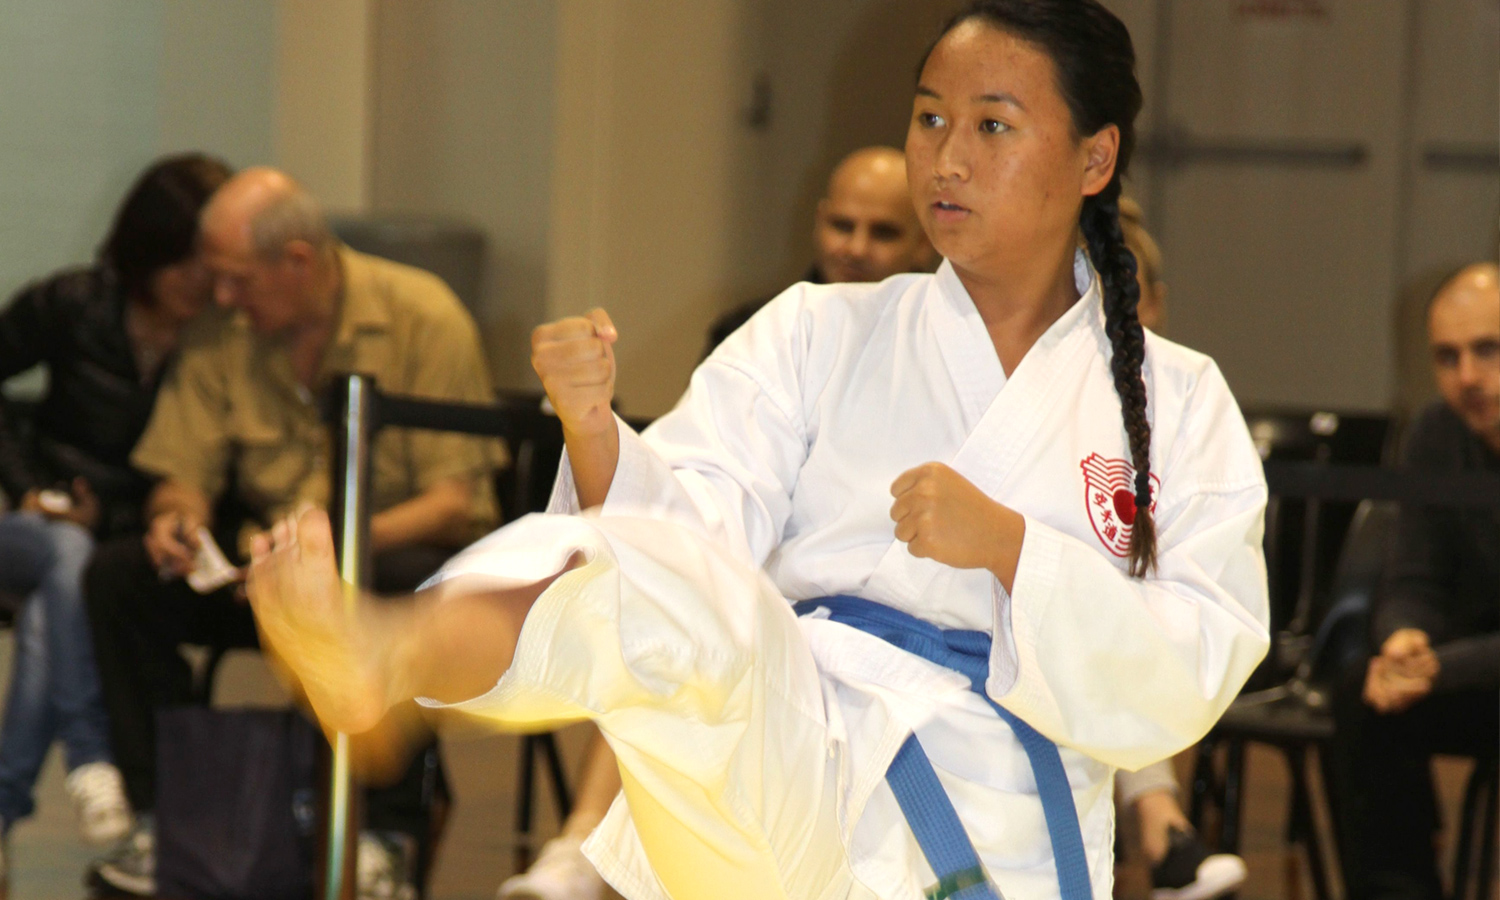 Karate for Teens and Adults